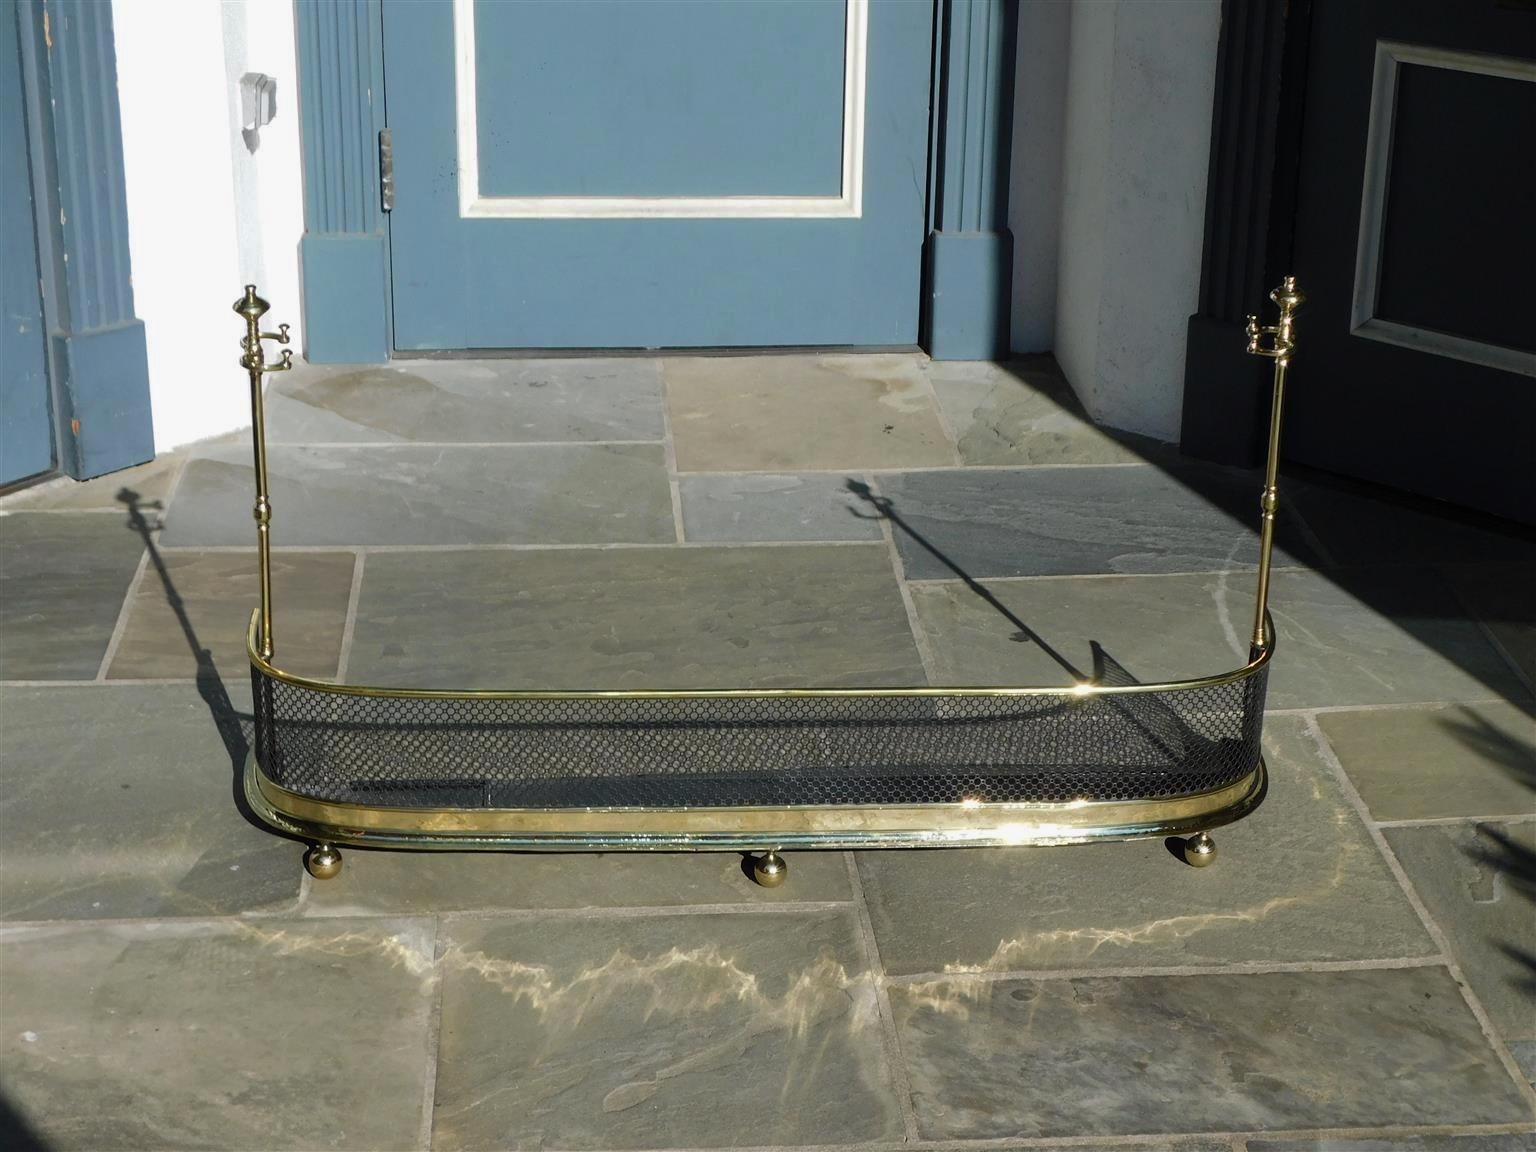 English brass and polished steel fire place fender with a decorative pierced gallery, original flanking bulbous finial tool holders, interior iron pan, and resting on the original three ball feet. Early 19th century
Fender height on each end with